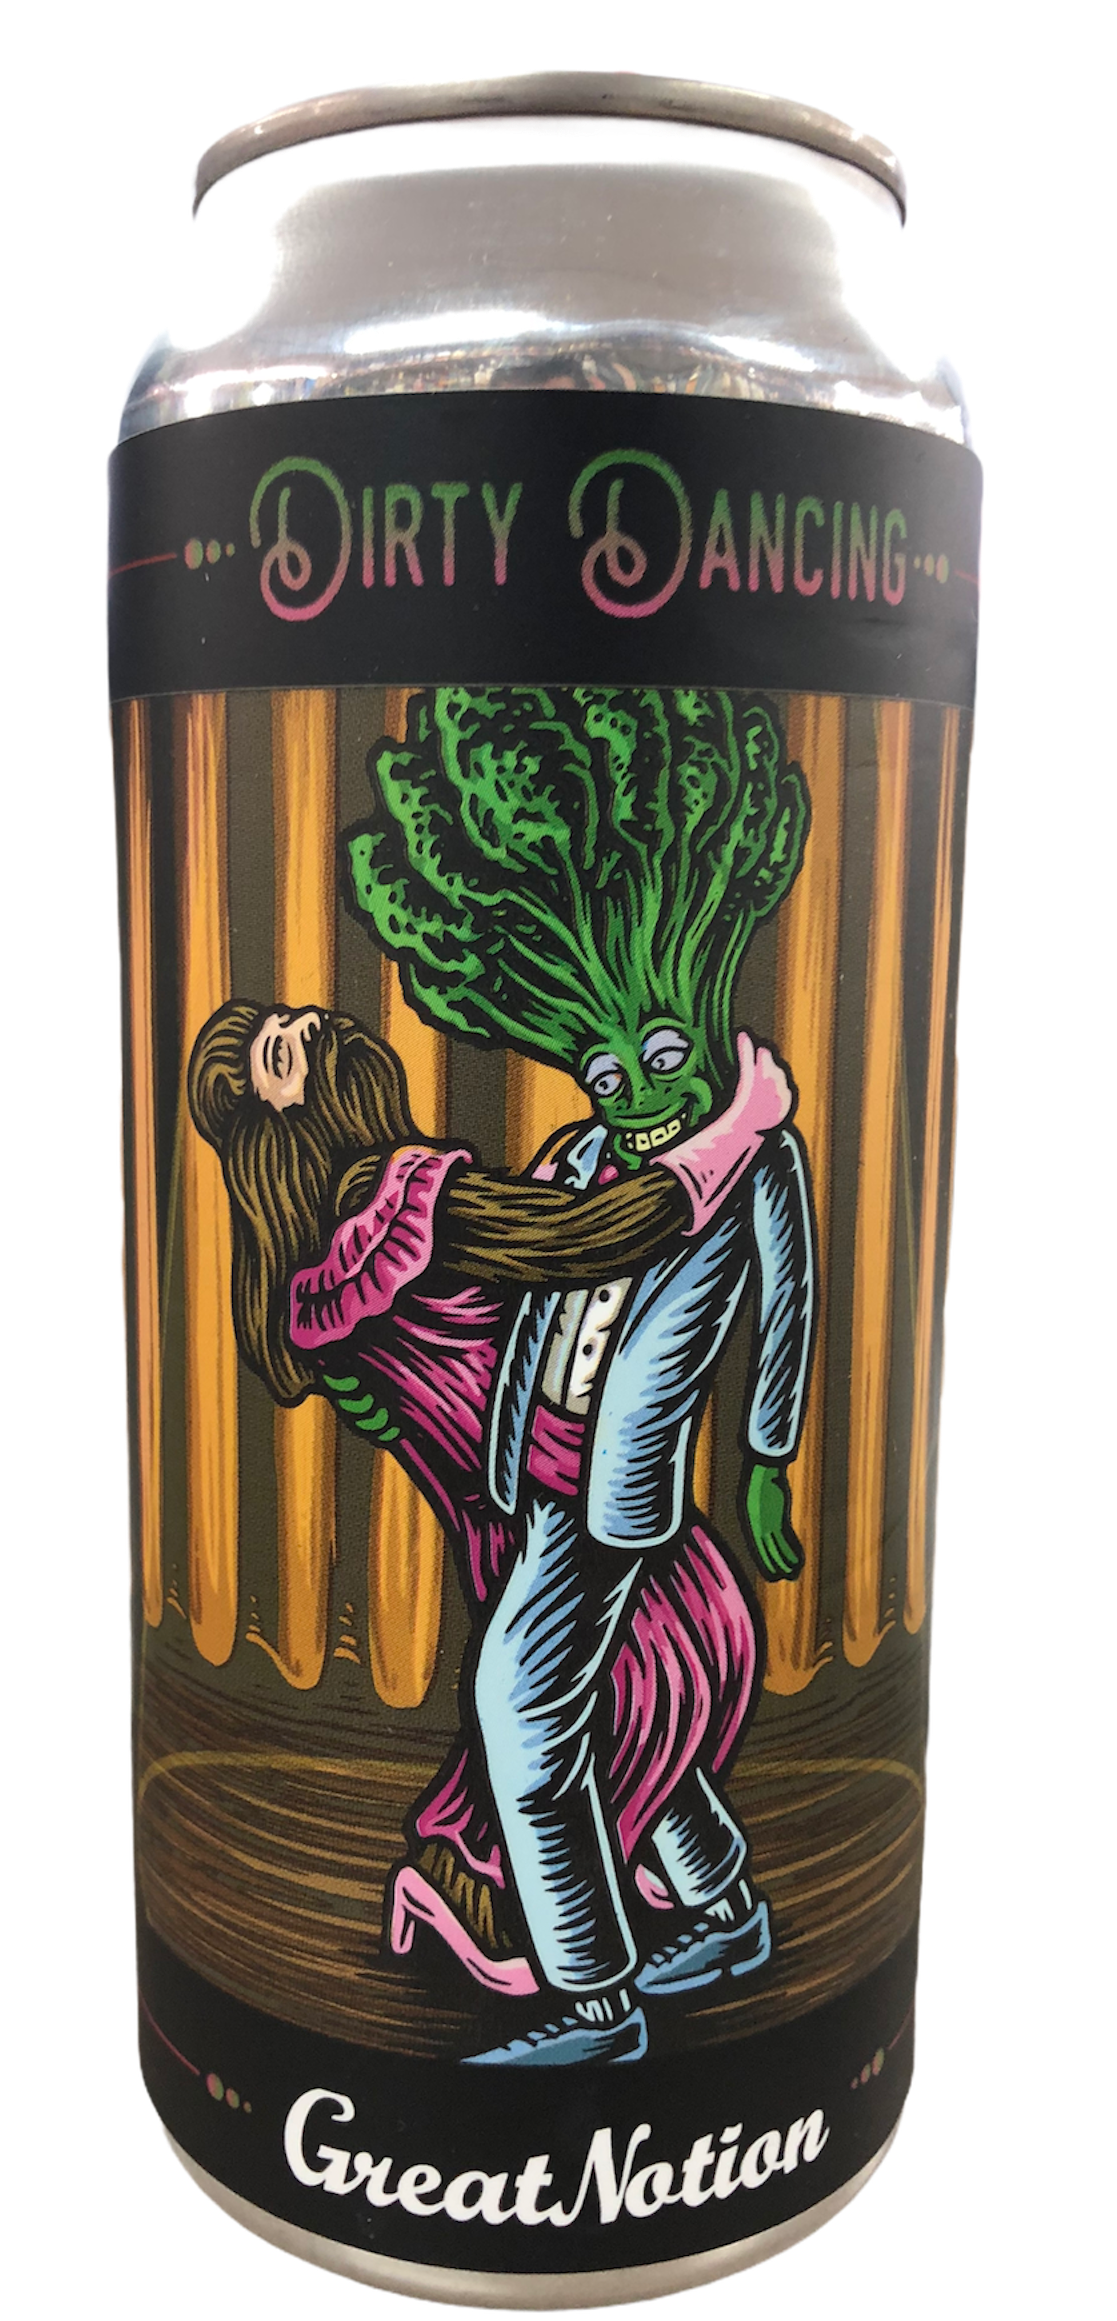 Buy Great Notion Dirty Dancing Online -Craft City